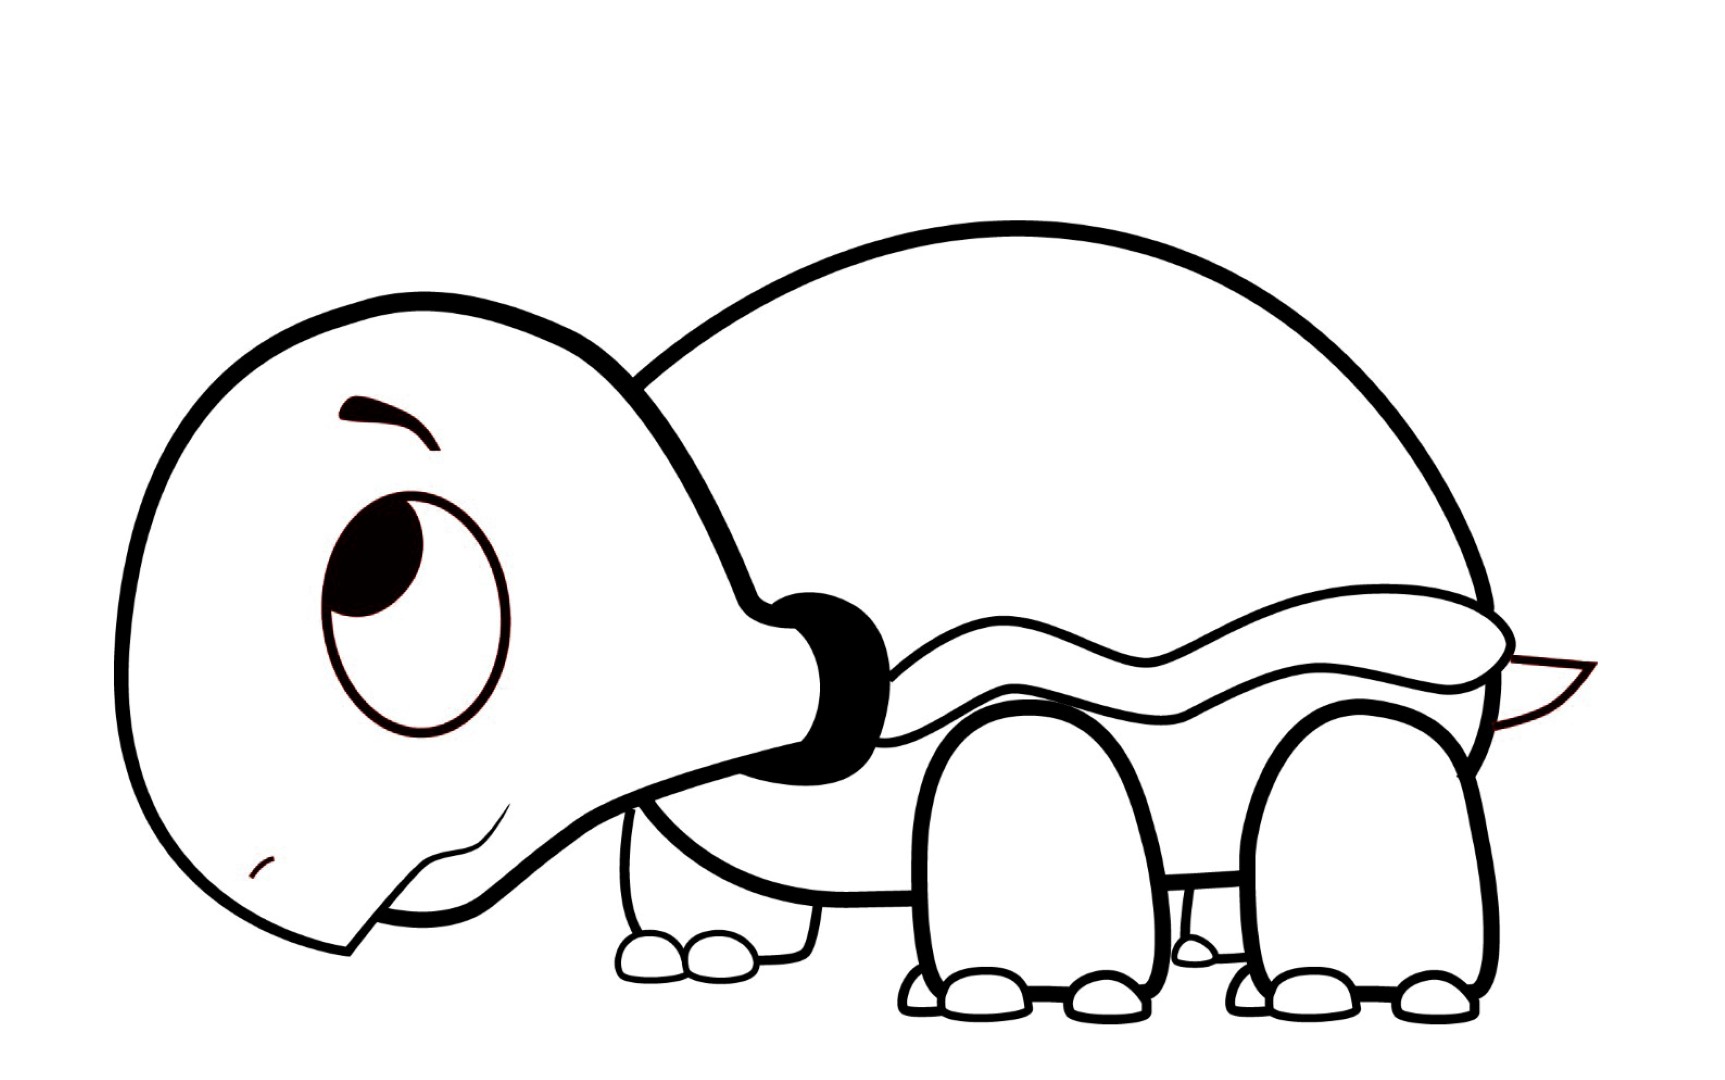 Turtle coloring #10, Download drawings